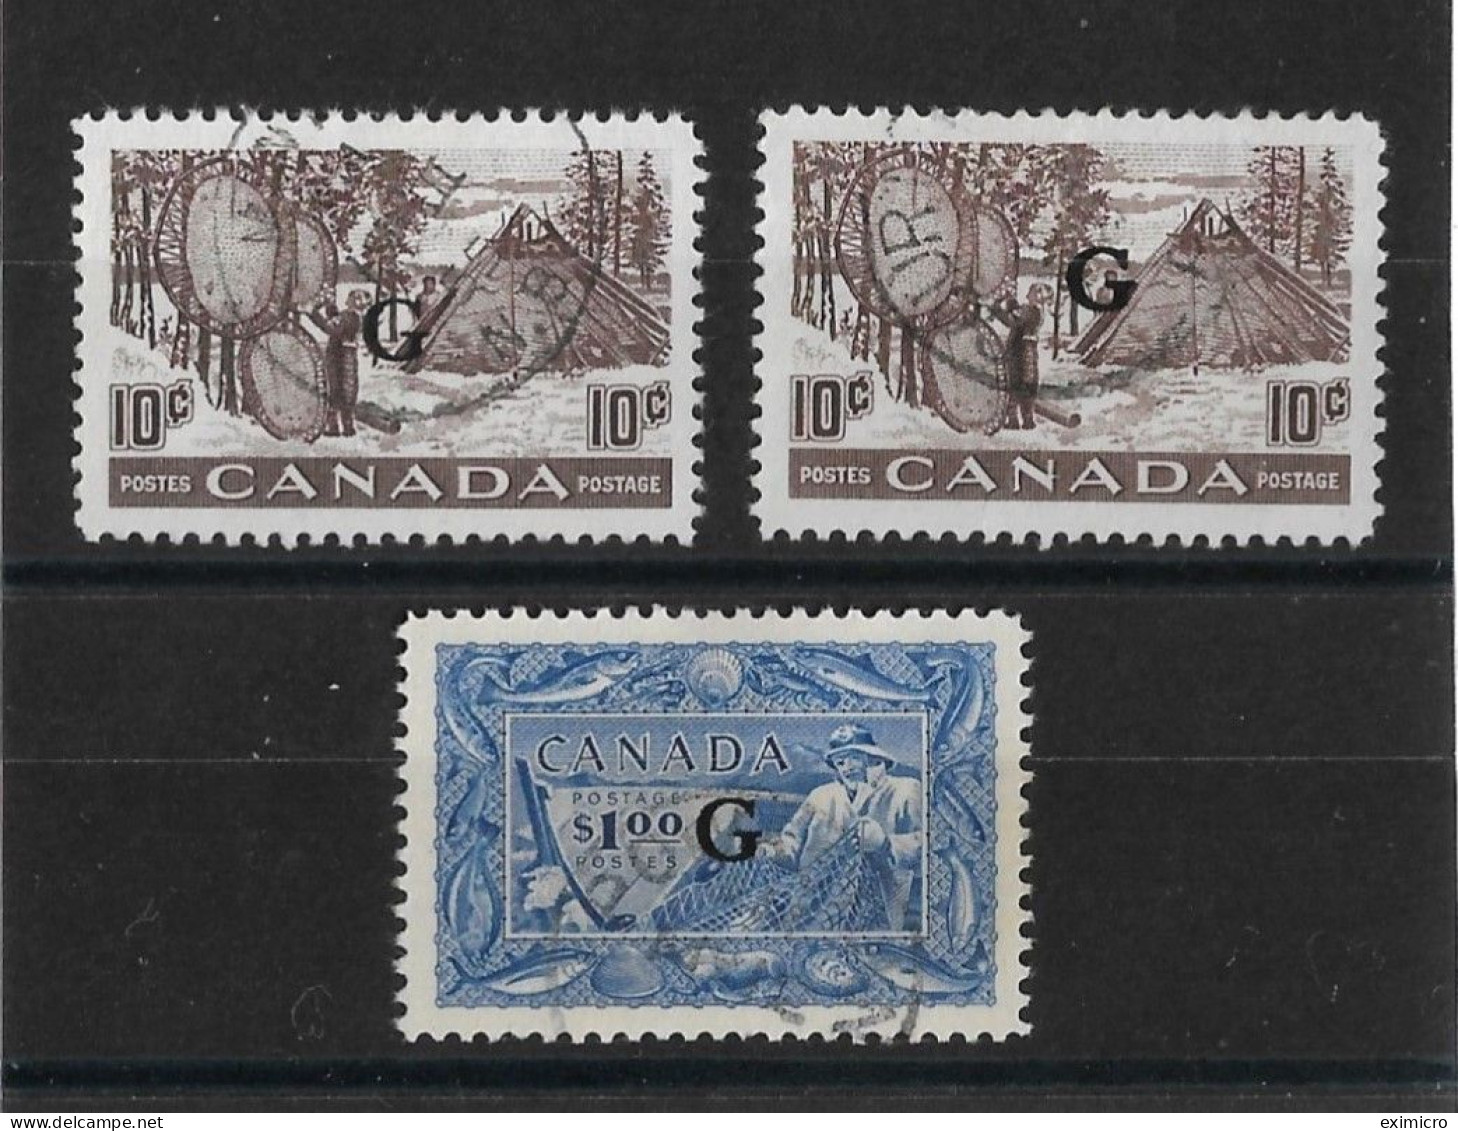 CANADA 1950 - 1951 OFFICIALS 'G' OVERPRINT SET + AN EXTRA 10c COLOUR SHADE SG O191 X 2, O192 FINE USED Cat £92 - Sovraccarichi